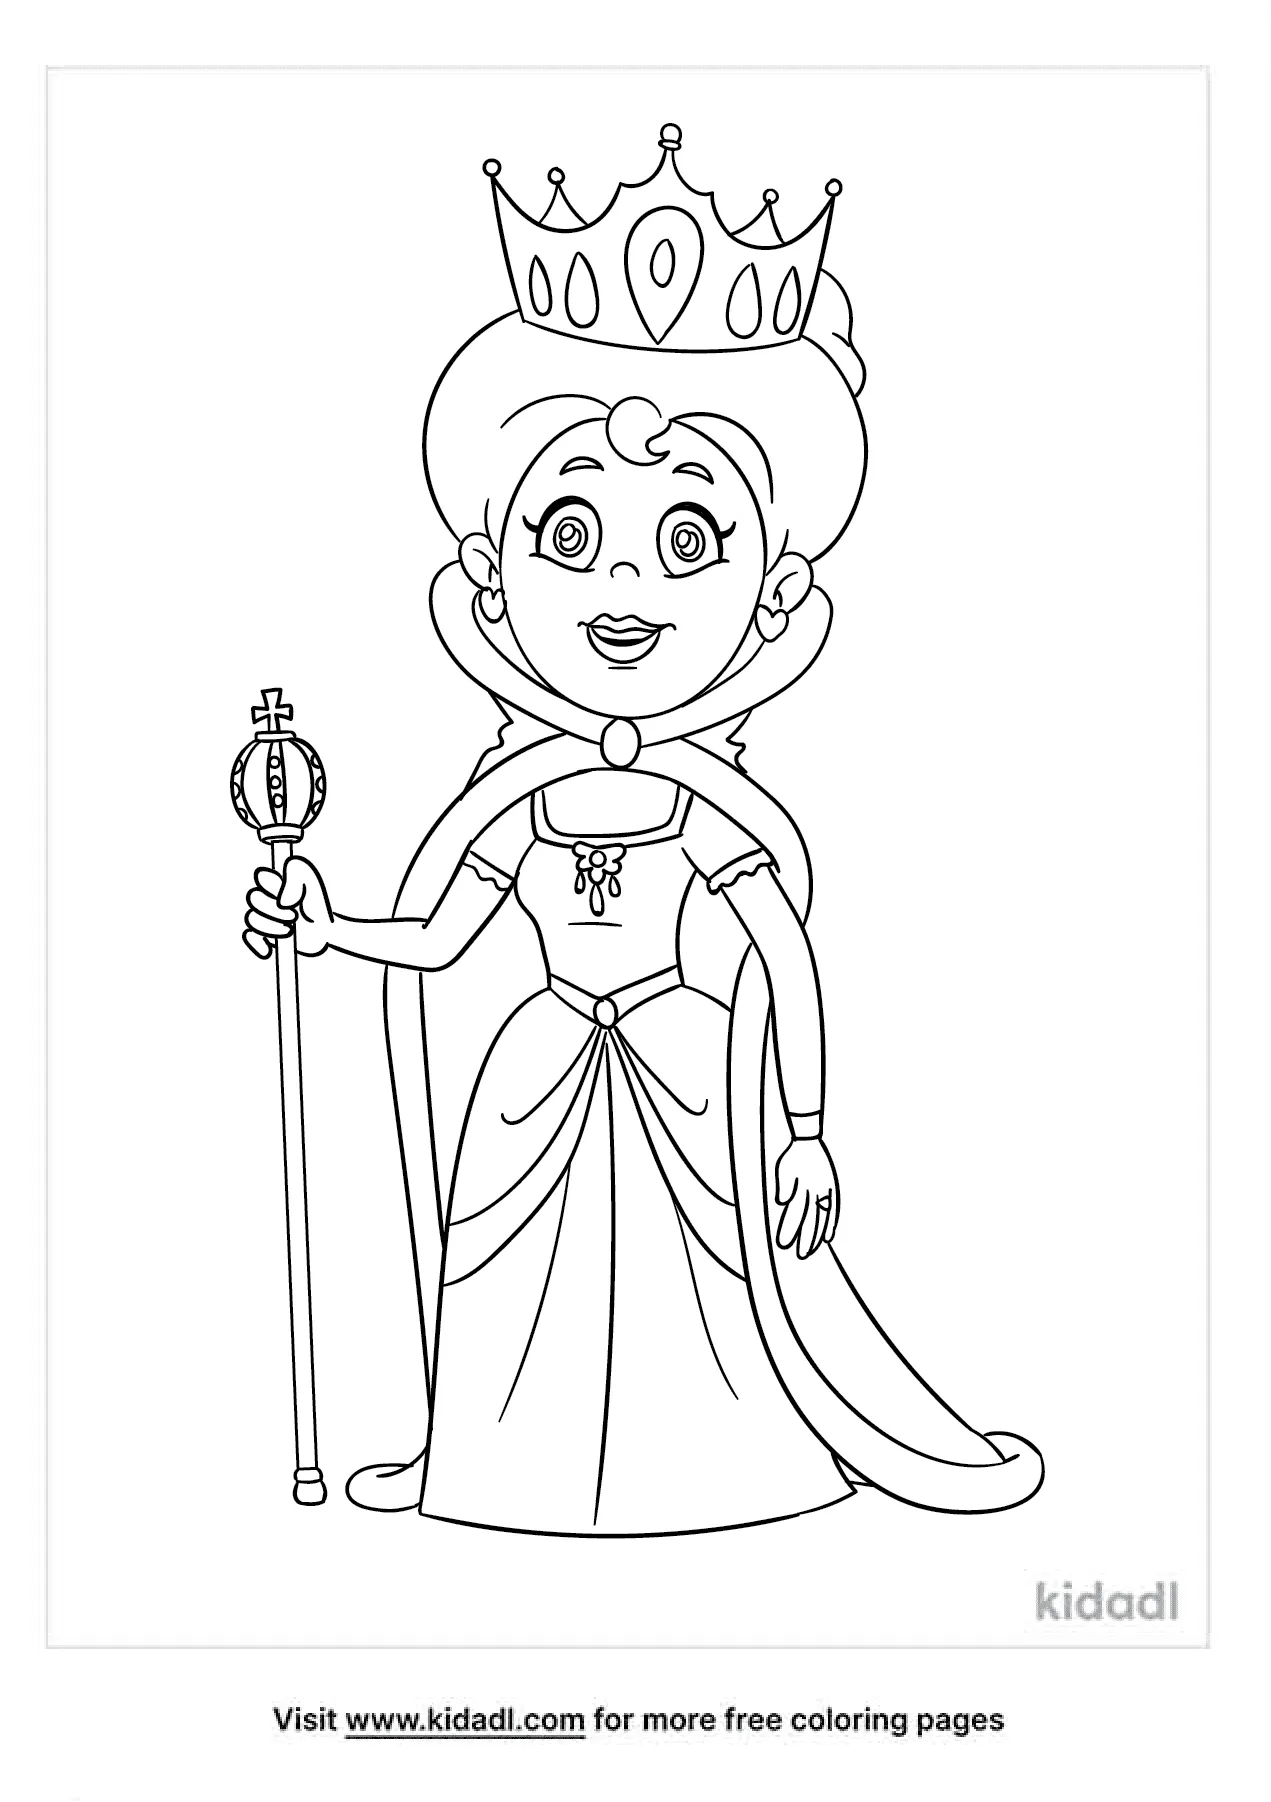 Queen Coloring Pages   Free Fantasy & Characters Coloring Pages ...